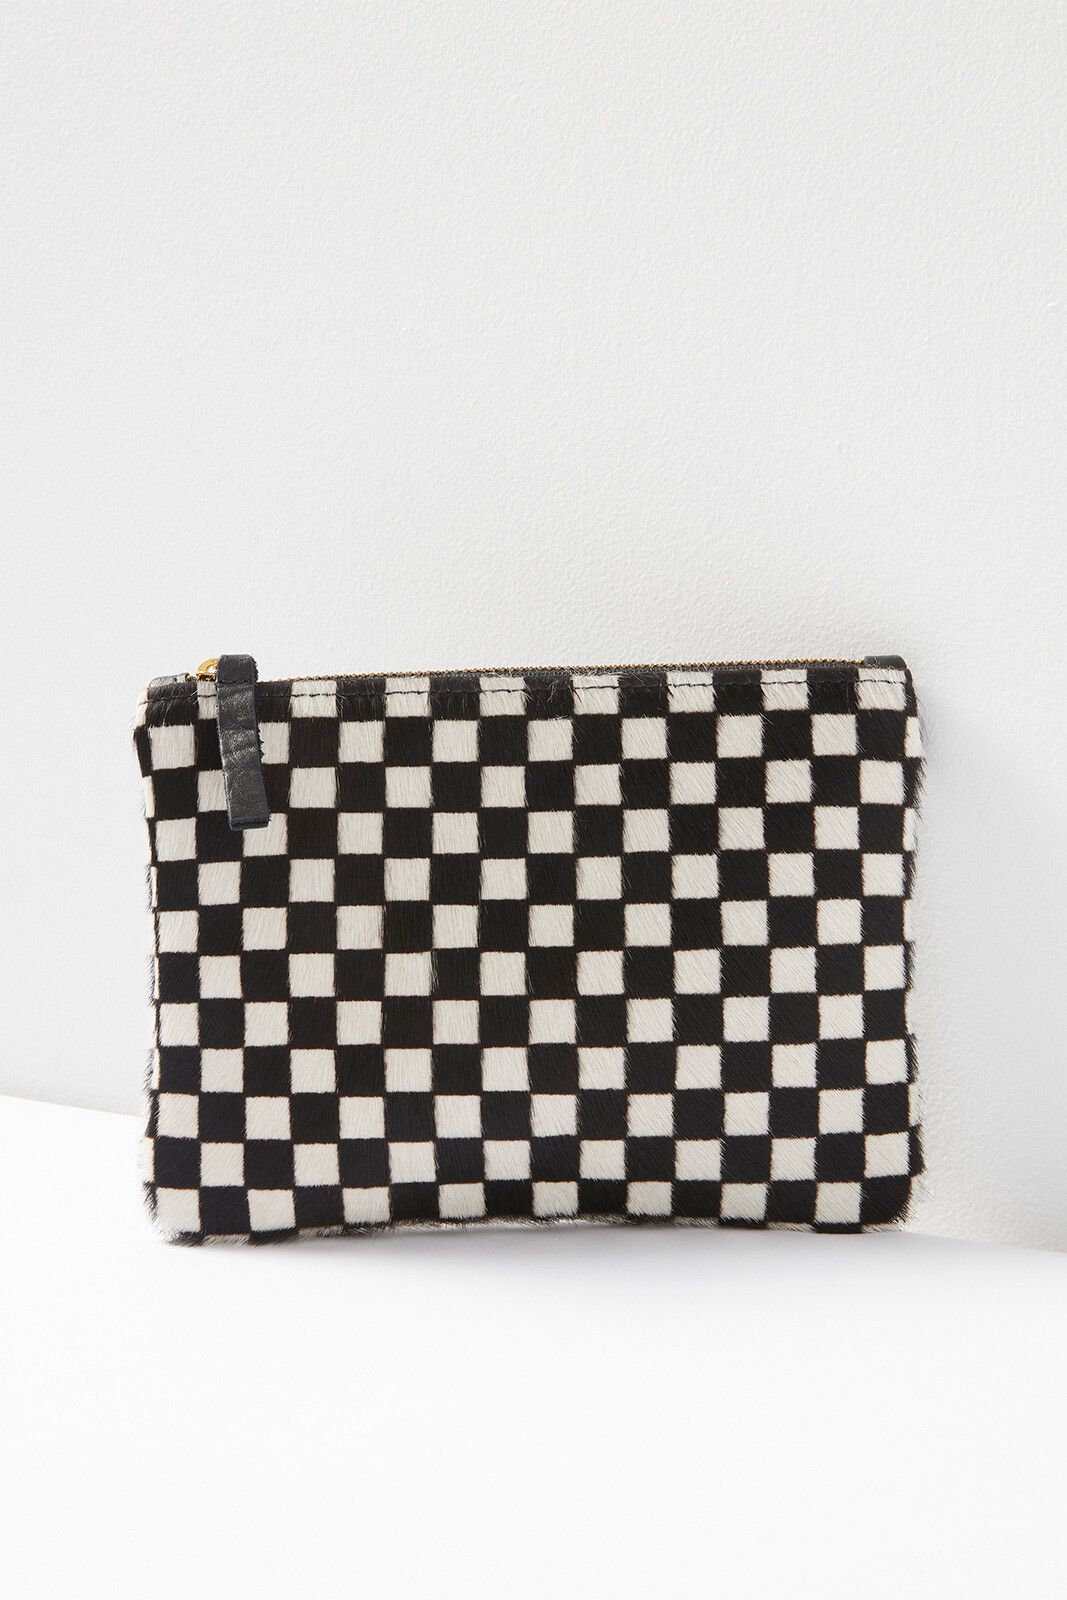 PRIMECUT Checkered Leather Pouch | EVEREVE | Evereve